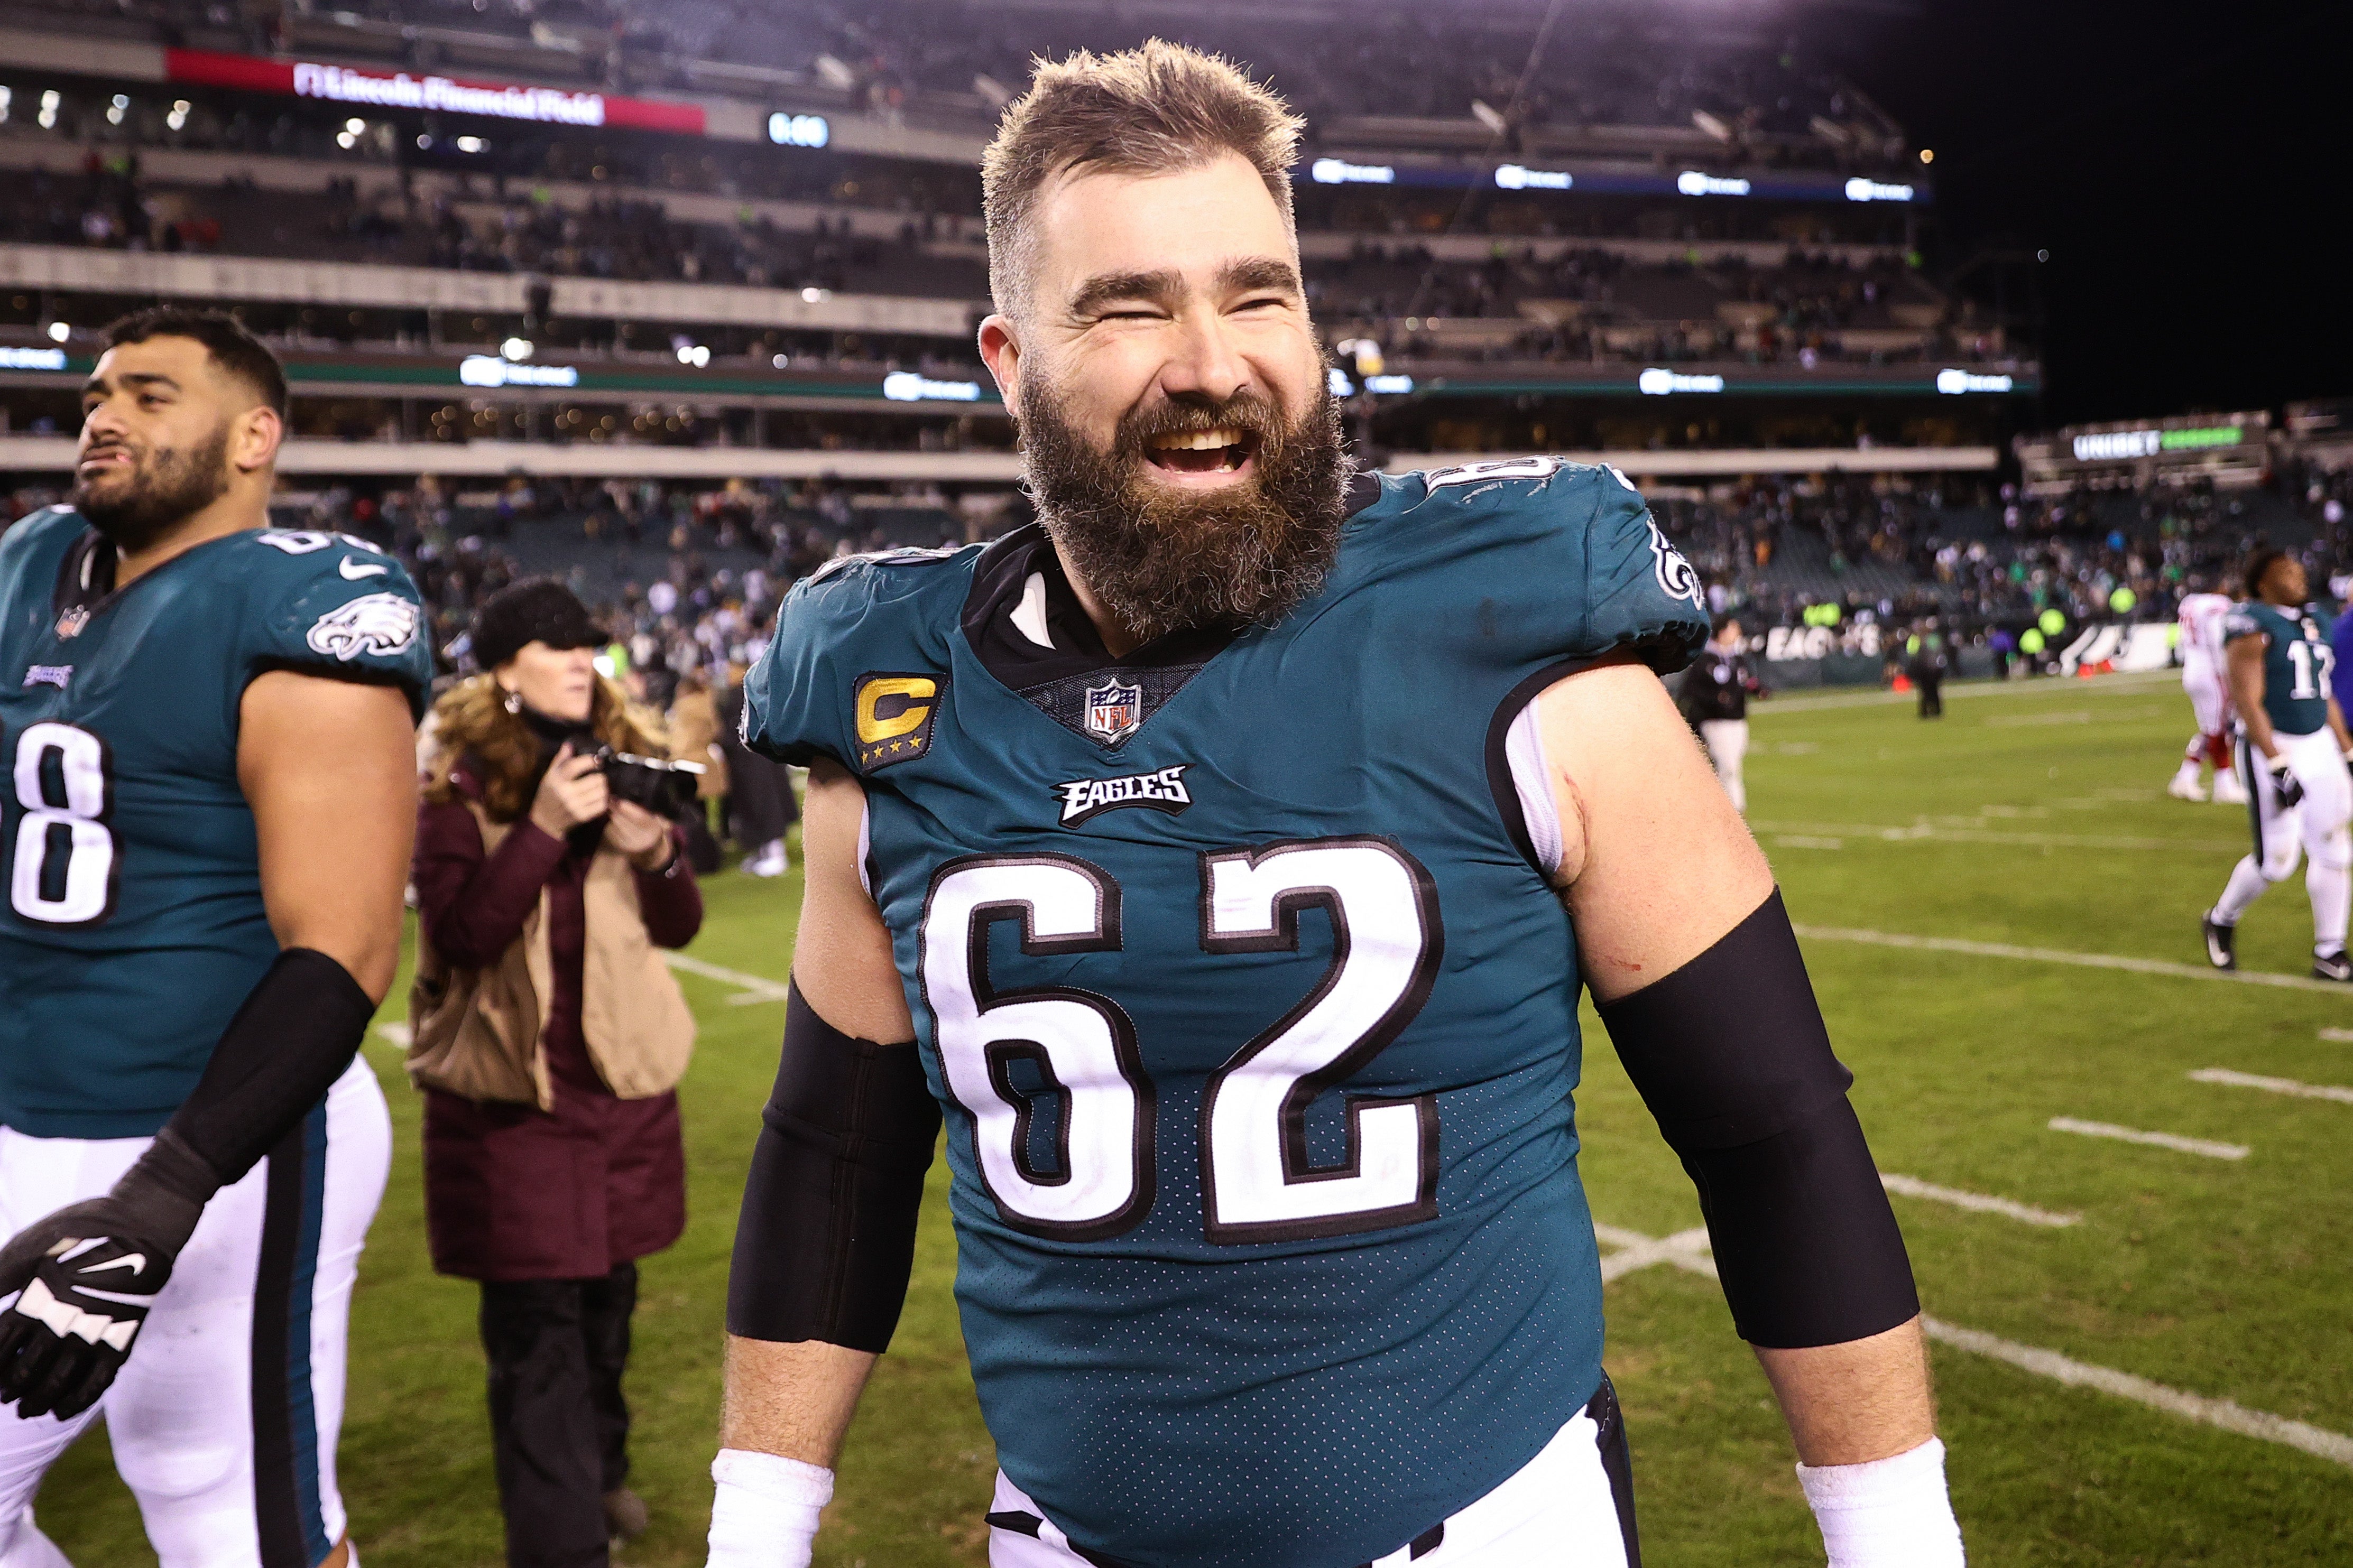 Eagles star Jason Kelce's wife, Kylie, joins him on New Heights podcast